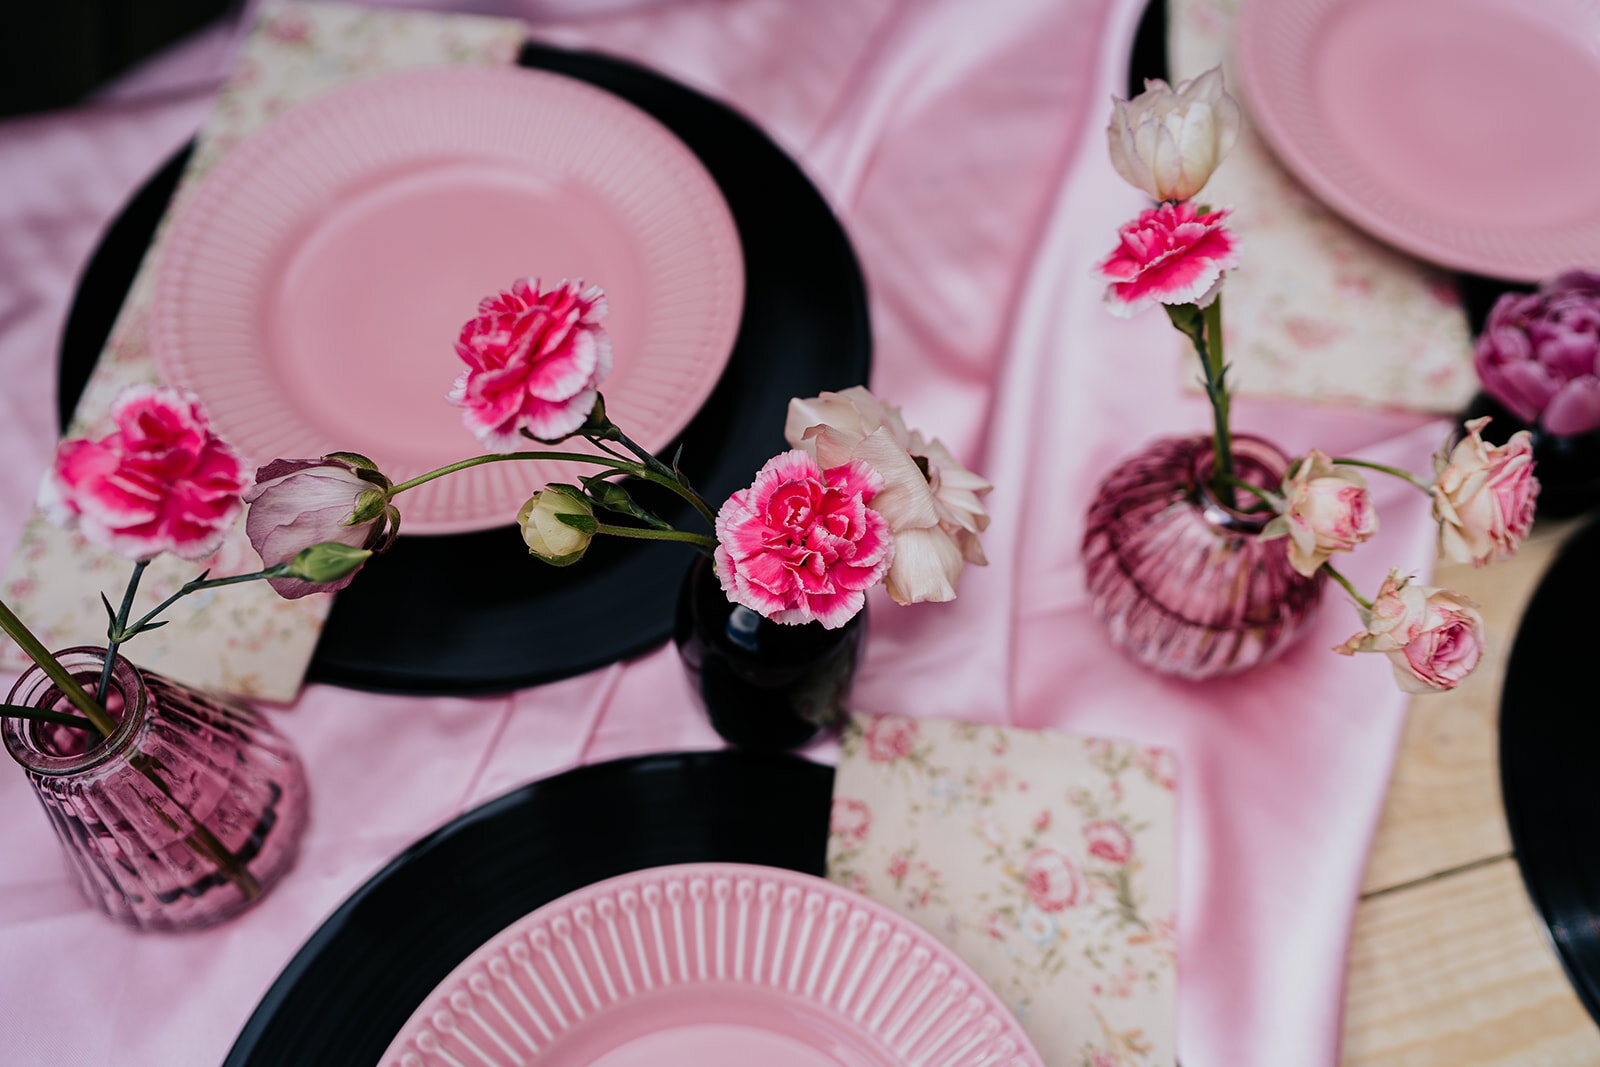 pink side plates and hot pink carnations